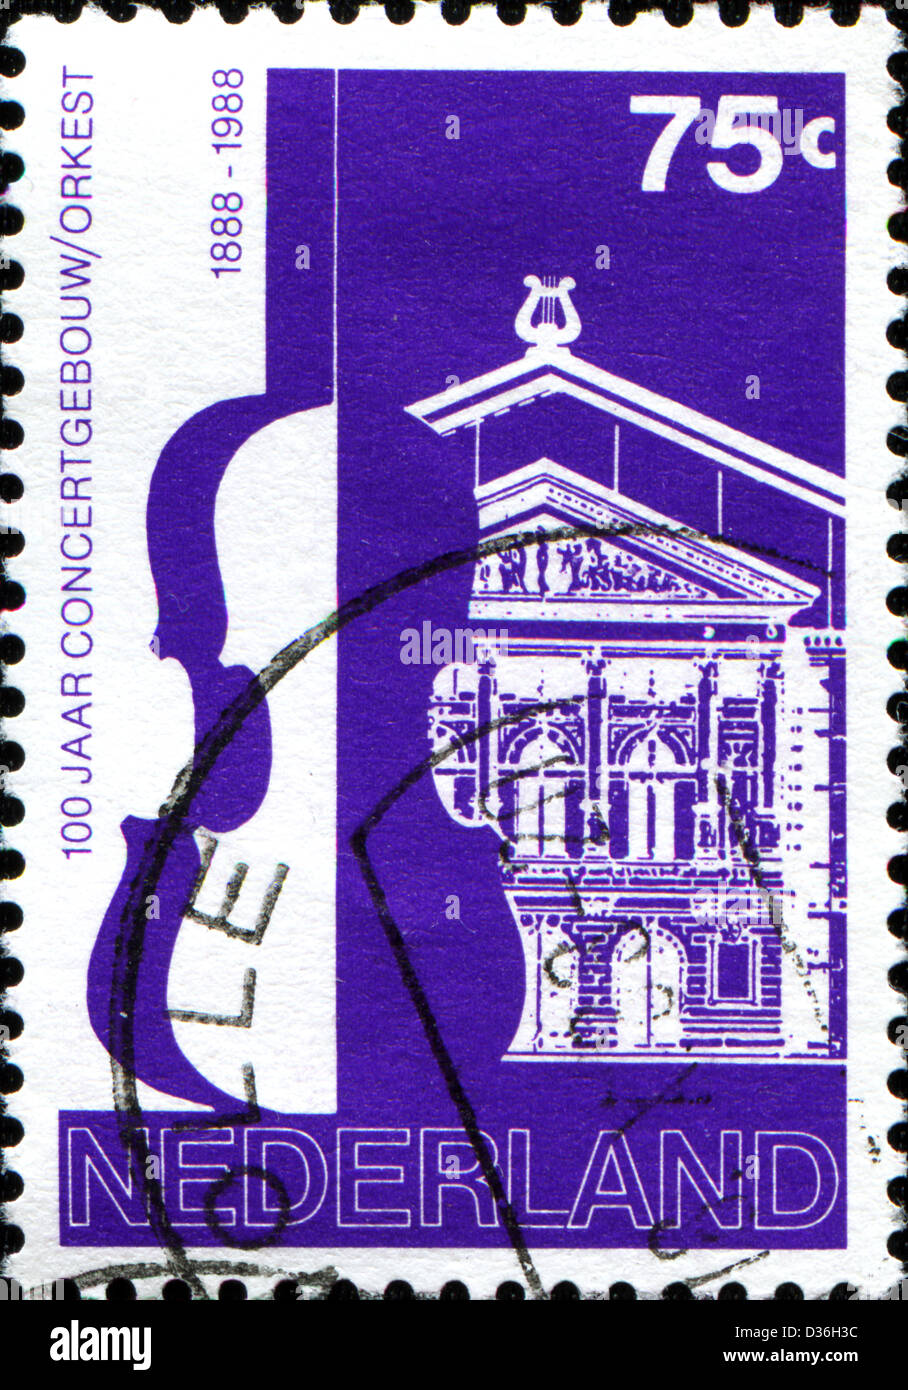 NETHERLANDS - CIRCA 1988: A stamp printed in Netherlands shows Amsterdam Concertgebouw and Orchestra, centenary, circa 1988 Stock Photo